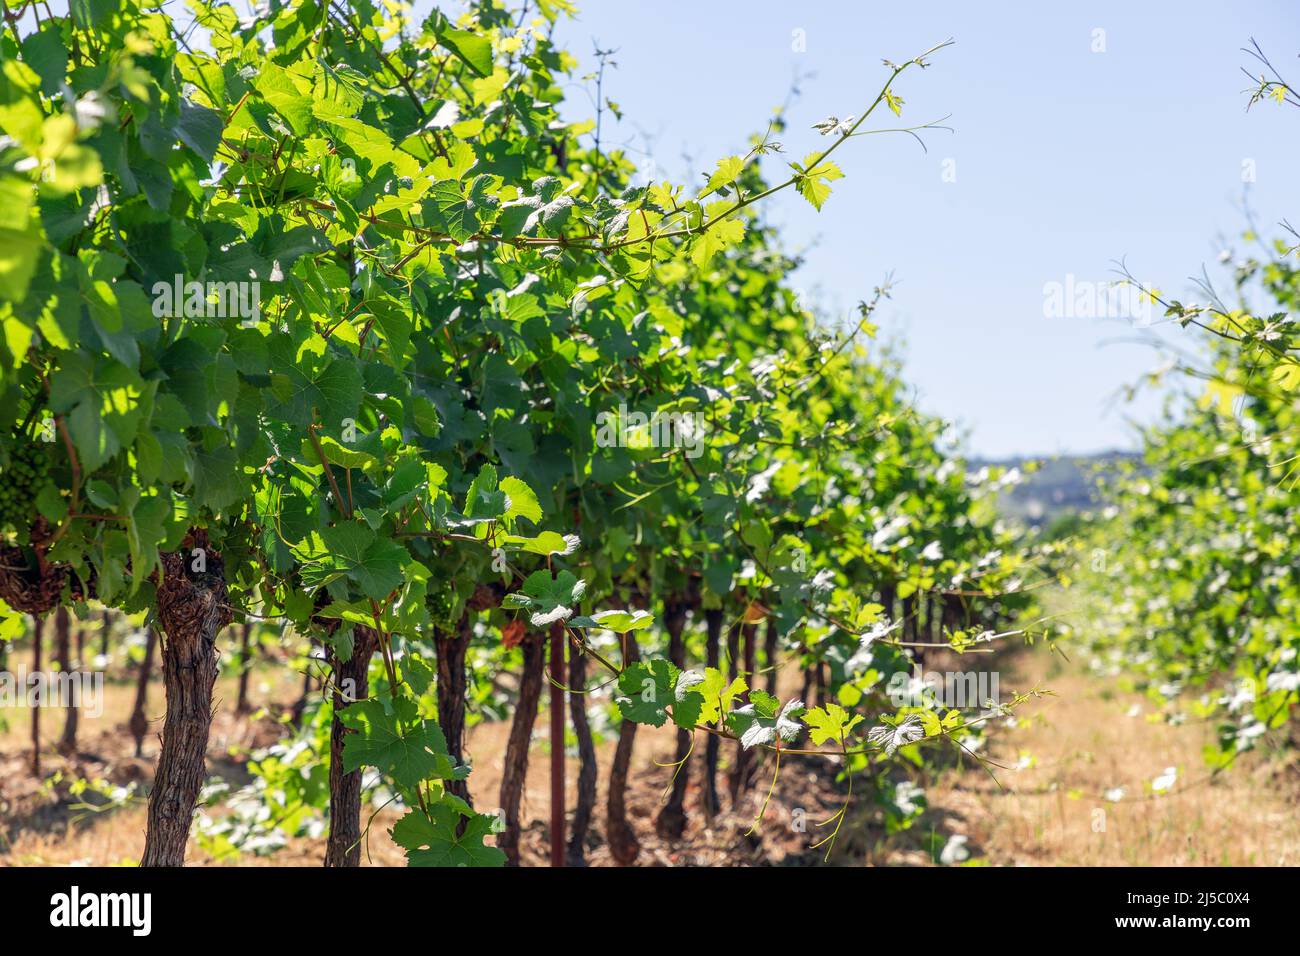 Low vineyard bushes with lush green foliage, young clusters of small grapes and vigorous shoots stretching towards sun on yellow soil of Provence Stock Photo